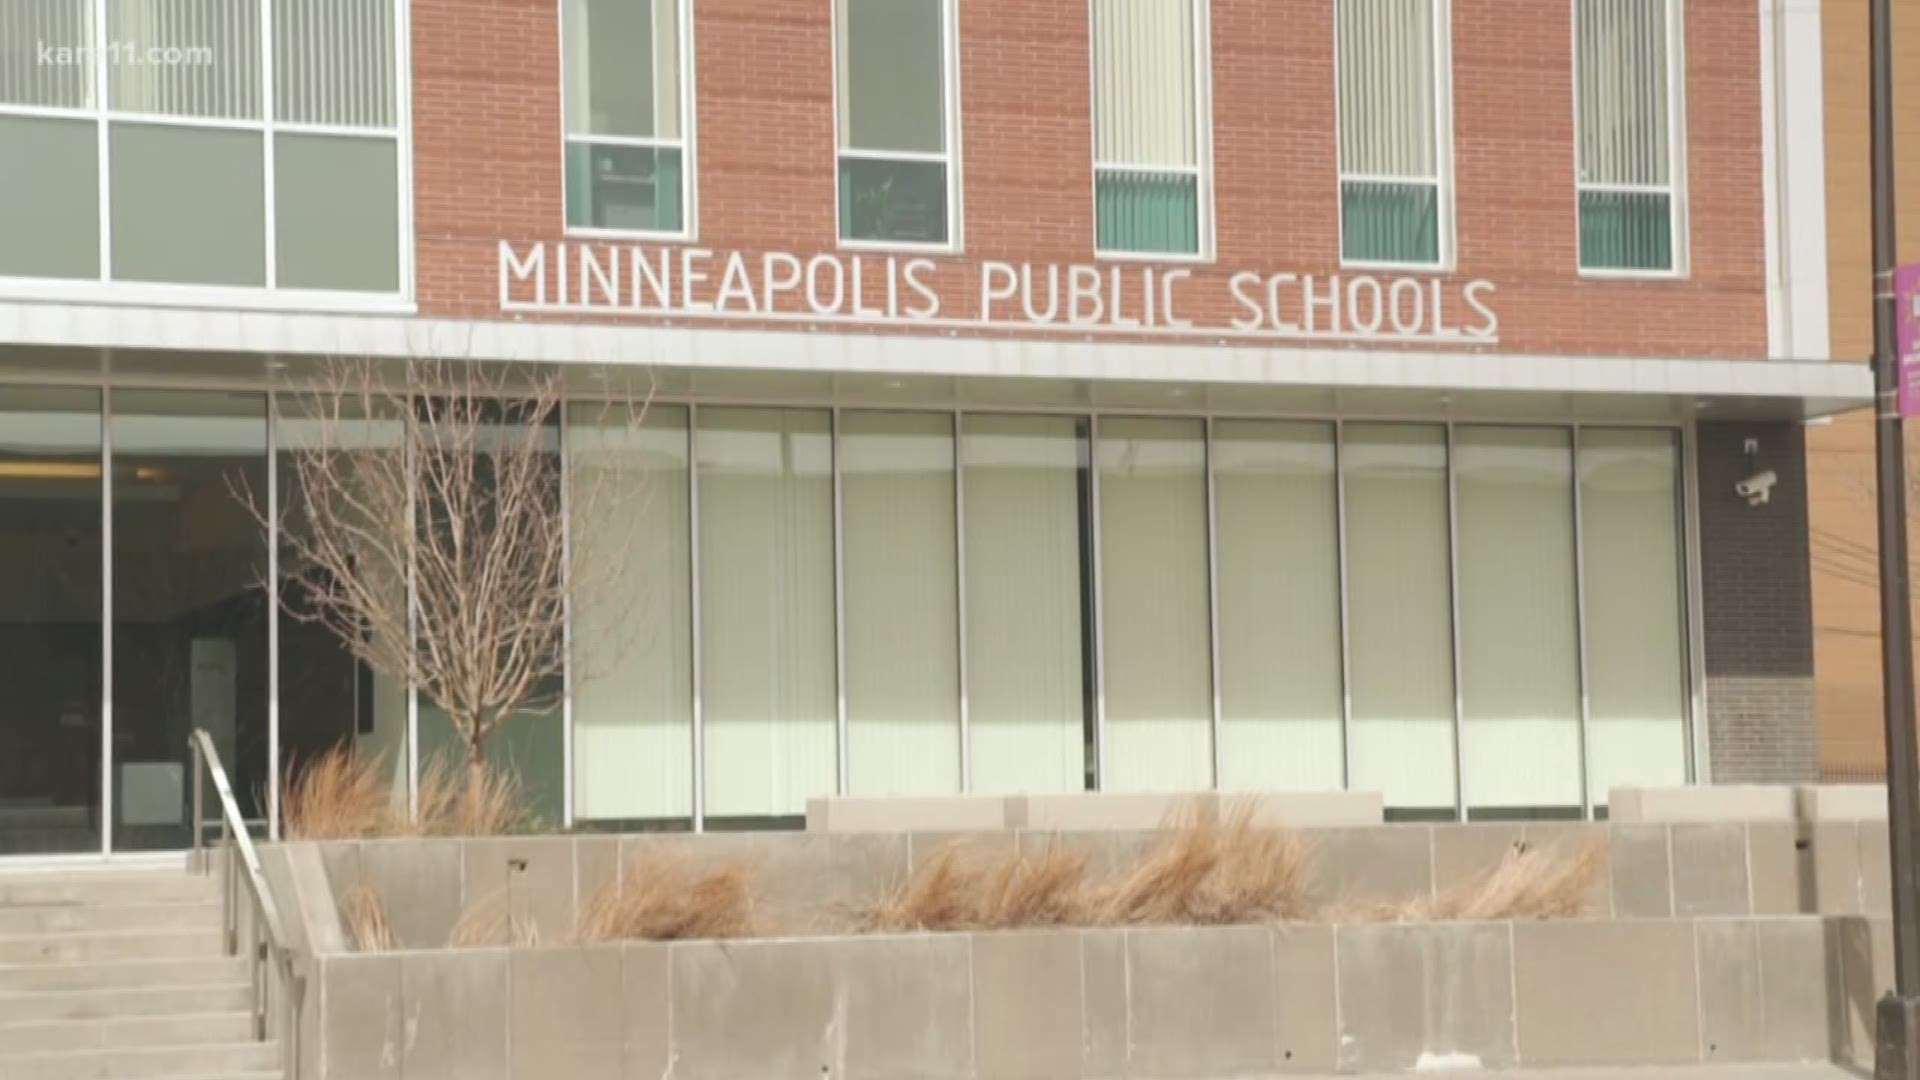 A KARE 11 investigation reveals missing cash, broken safes and the Minneapolis school district ignoring state law.